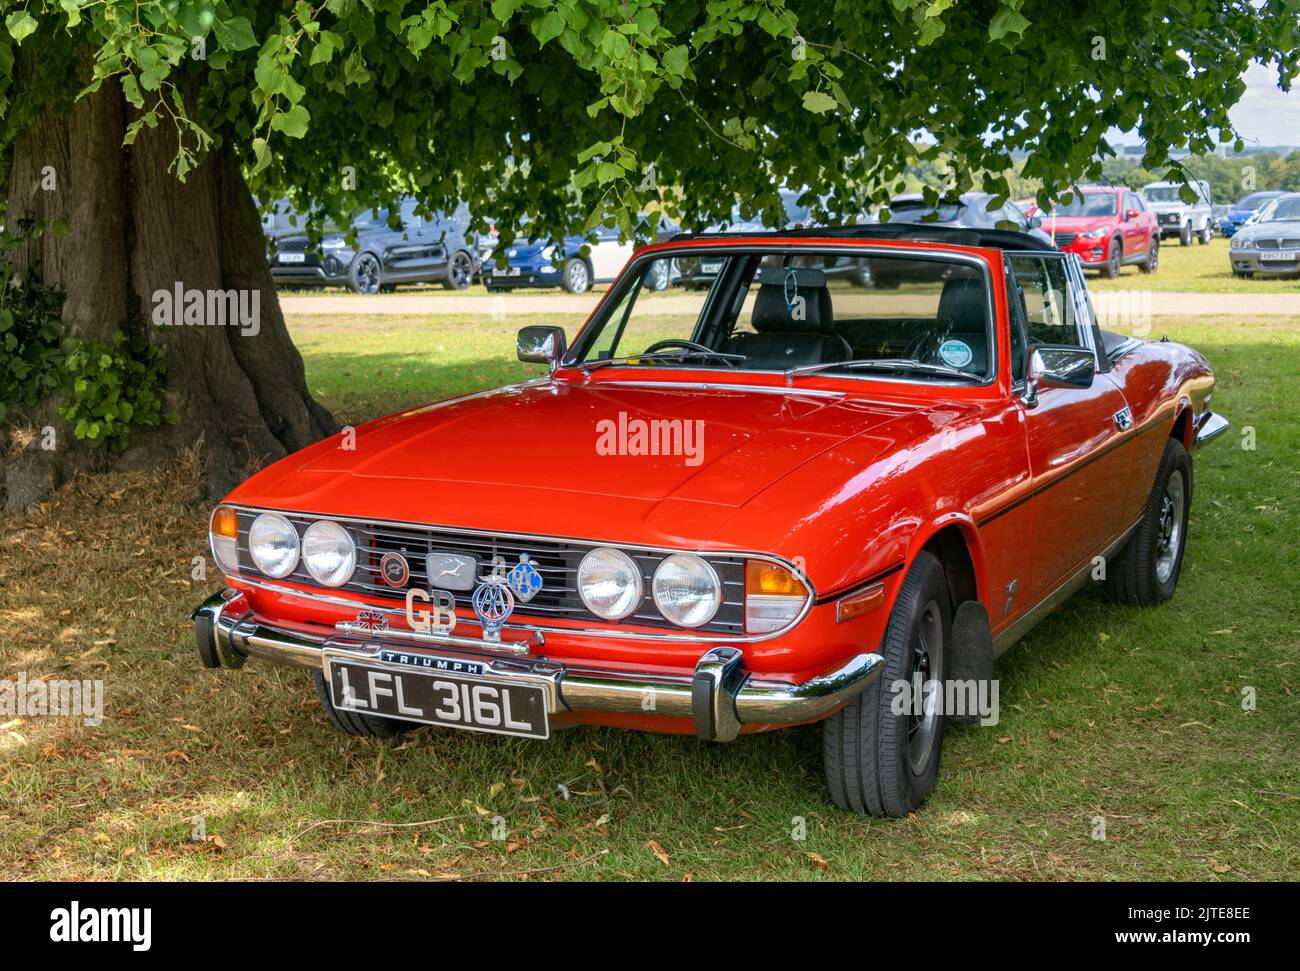 Red Triumph Stag Convertible classic car at Knebworth House classic car show 2022 Stock Photo